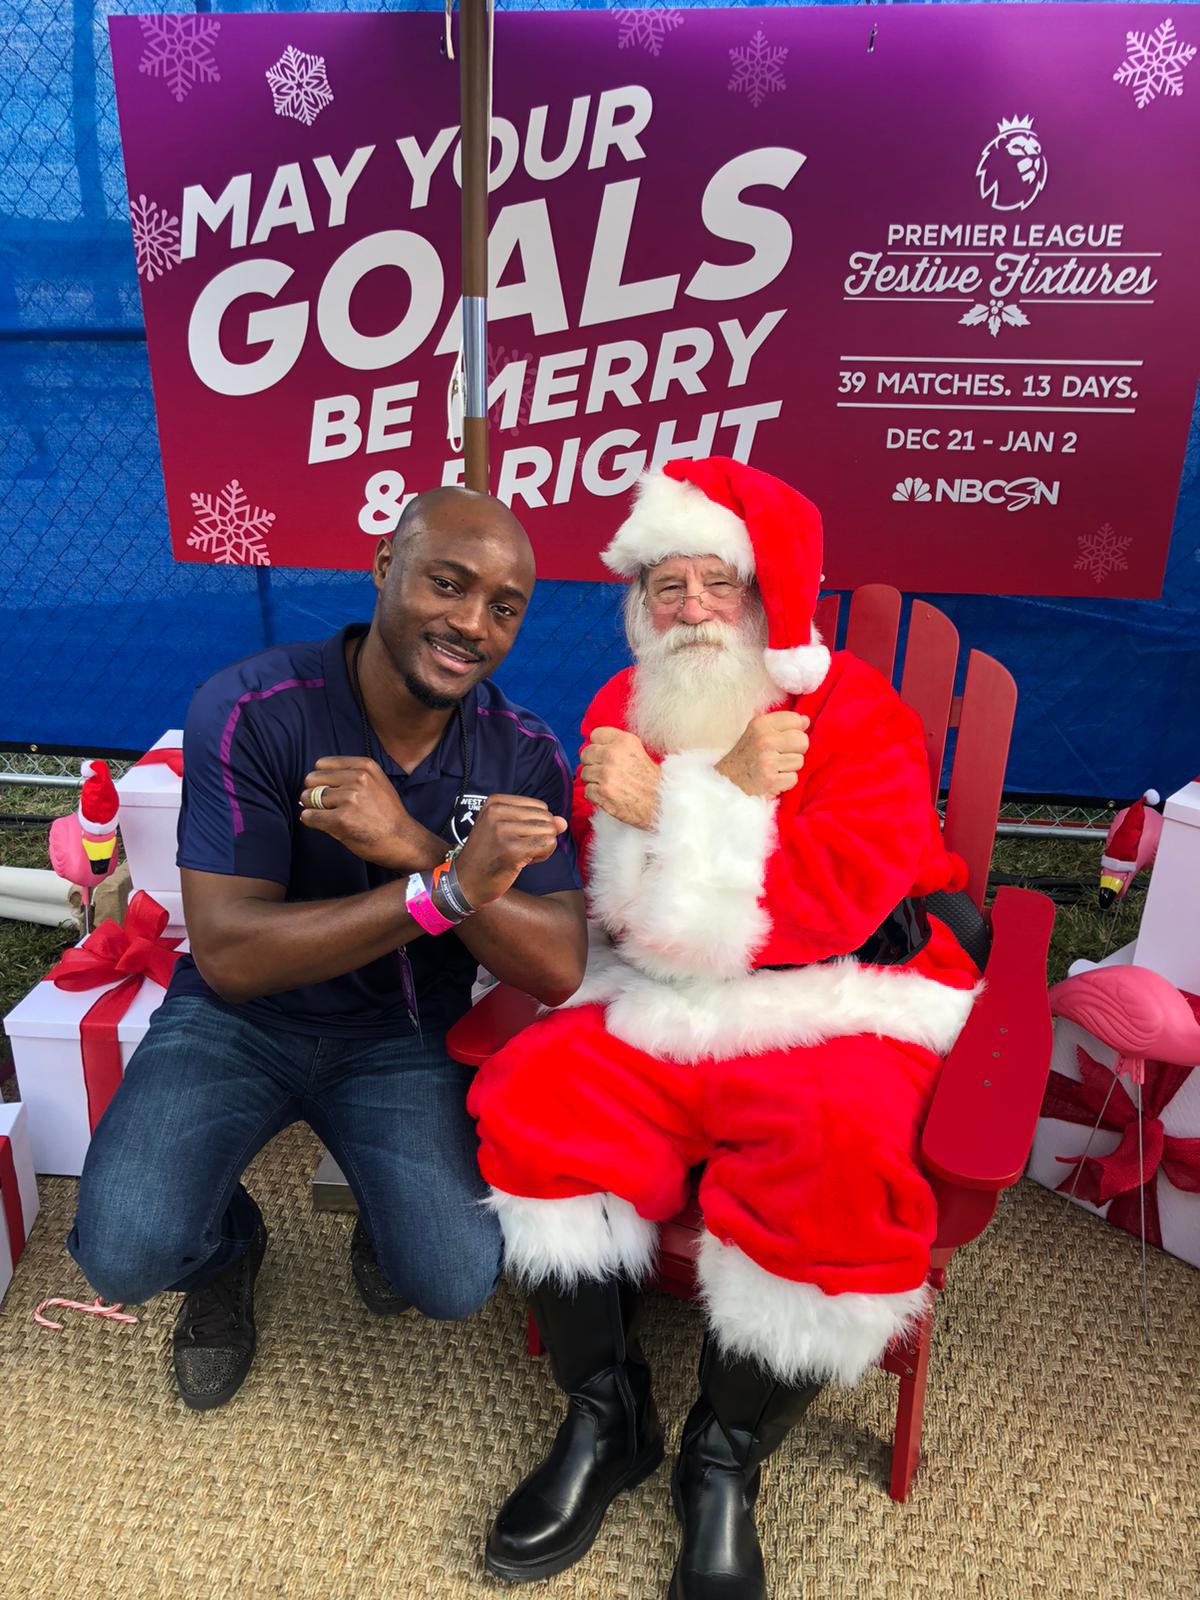 Santa granted West Ham's wish for three points at Southampton!